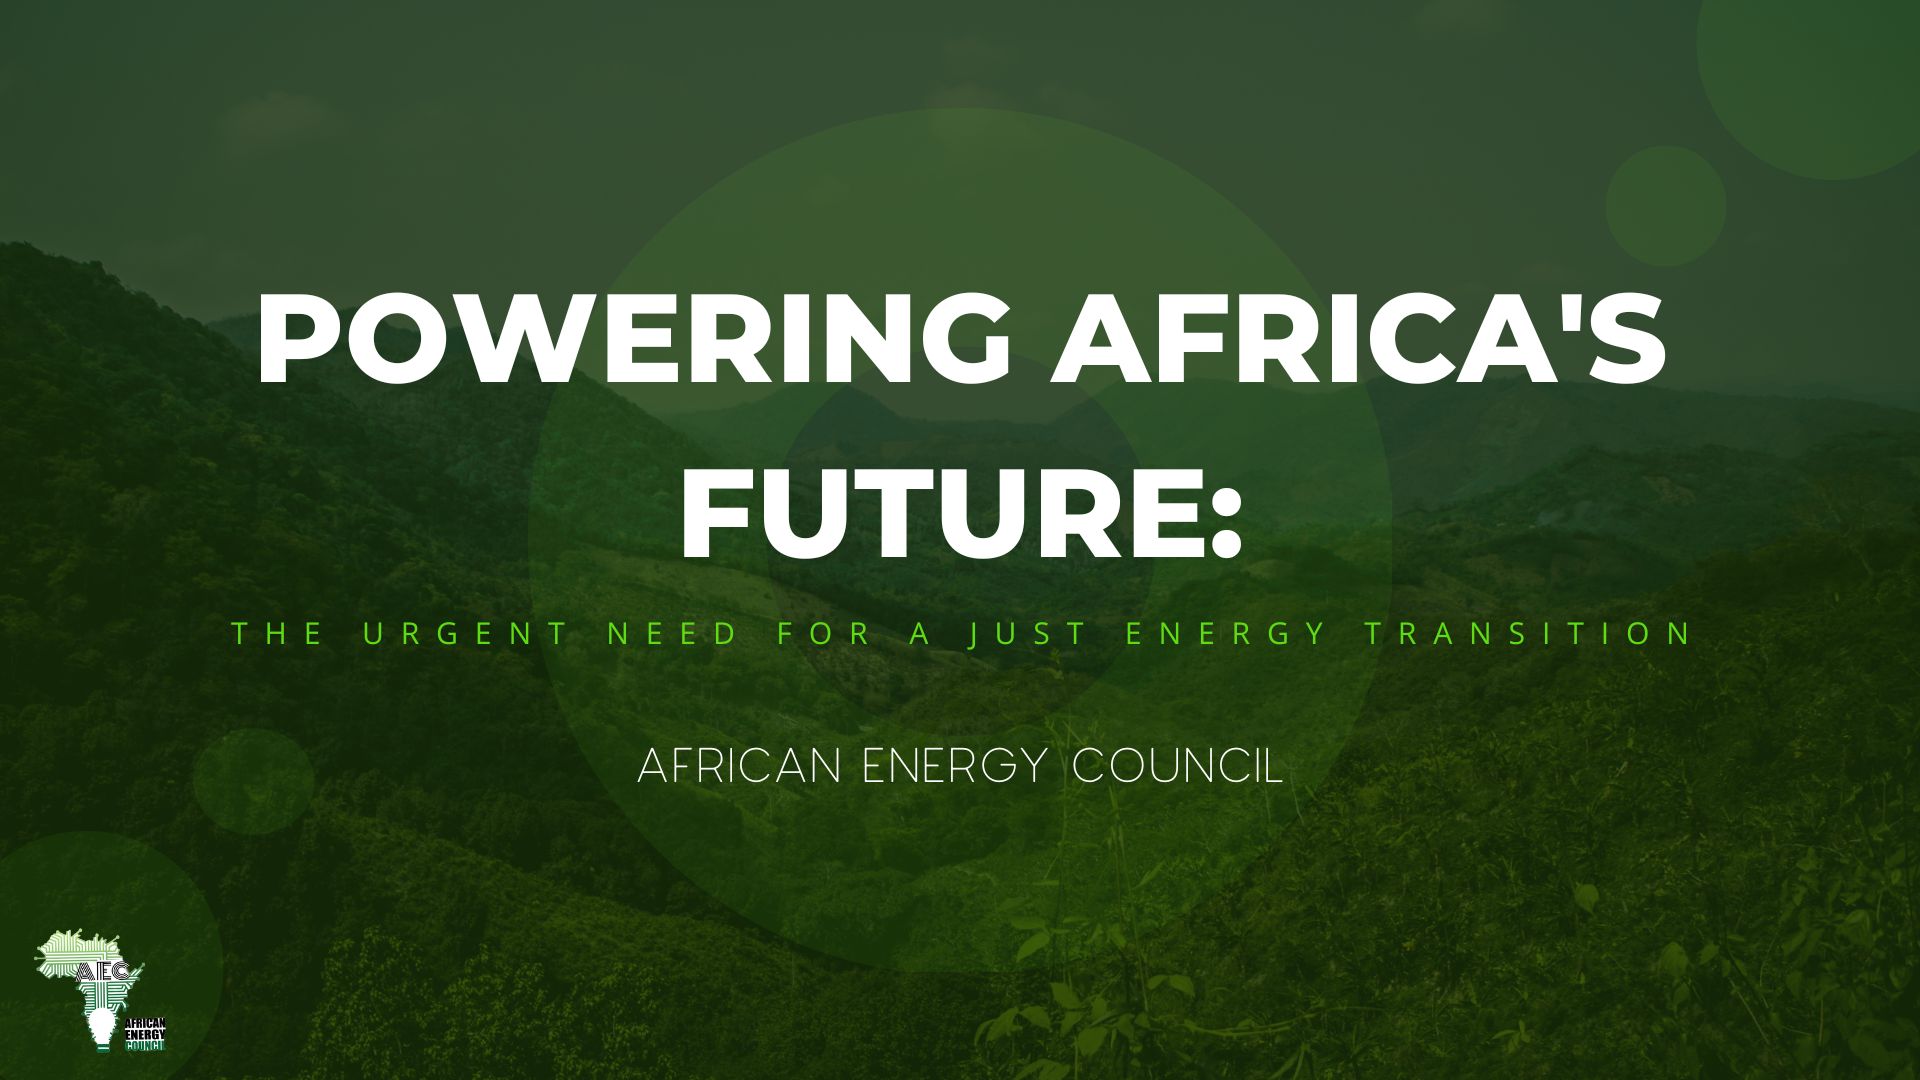 Powering Africa’s Future: The Urgent Need for a Just Energy Transition